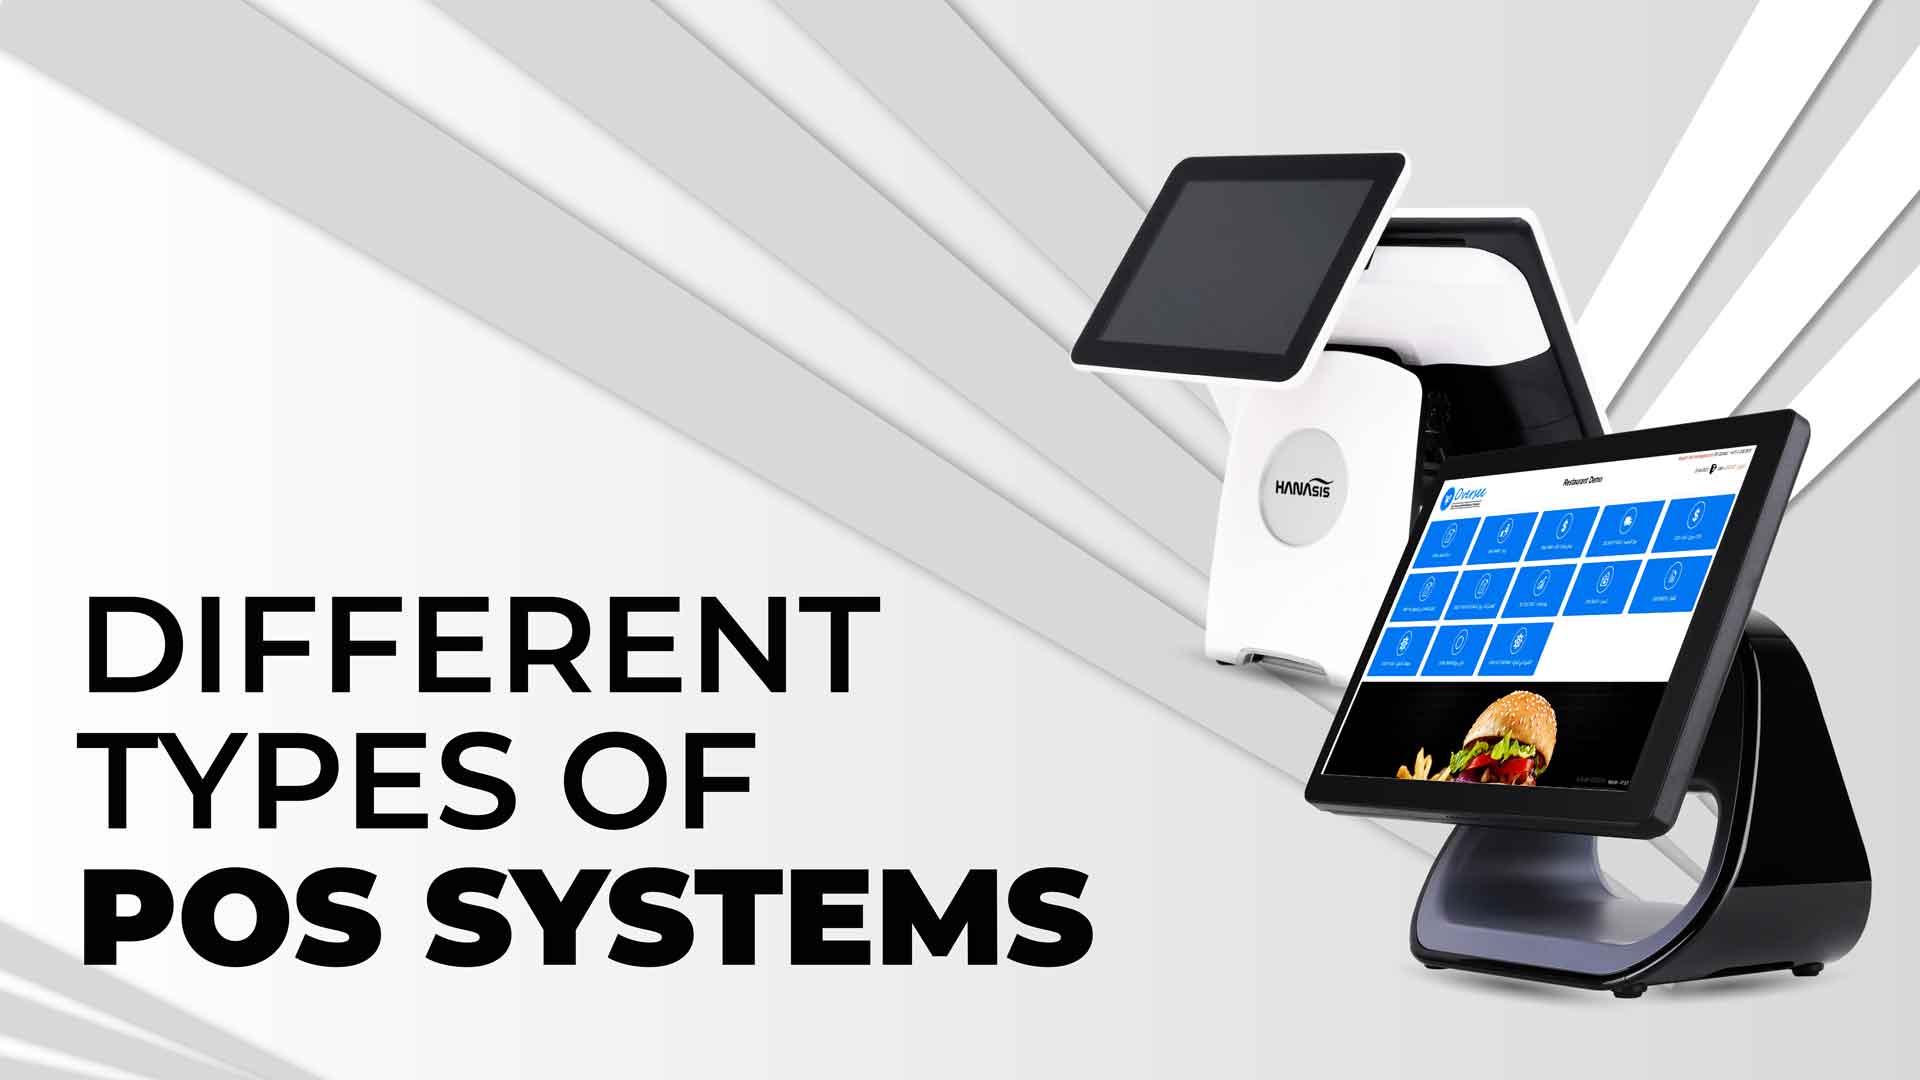 Different Types of POS Systems